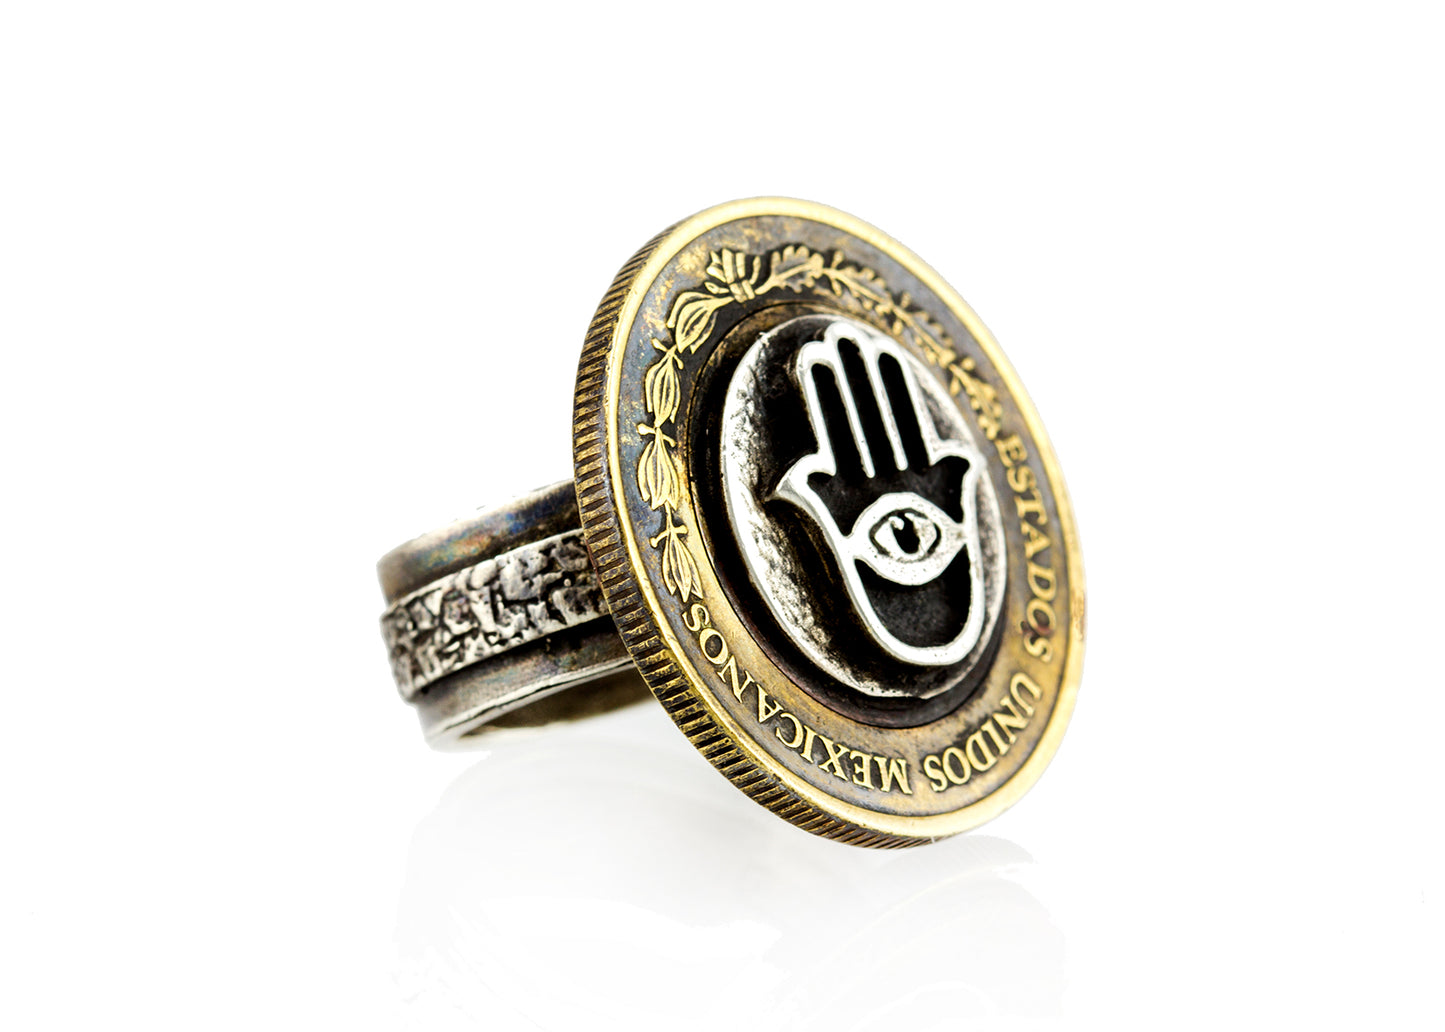 925 Sterling silver ring with Hamsa symbol and Mexican 10 peso